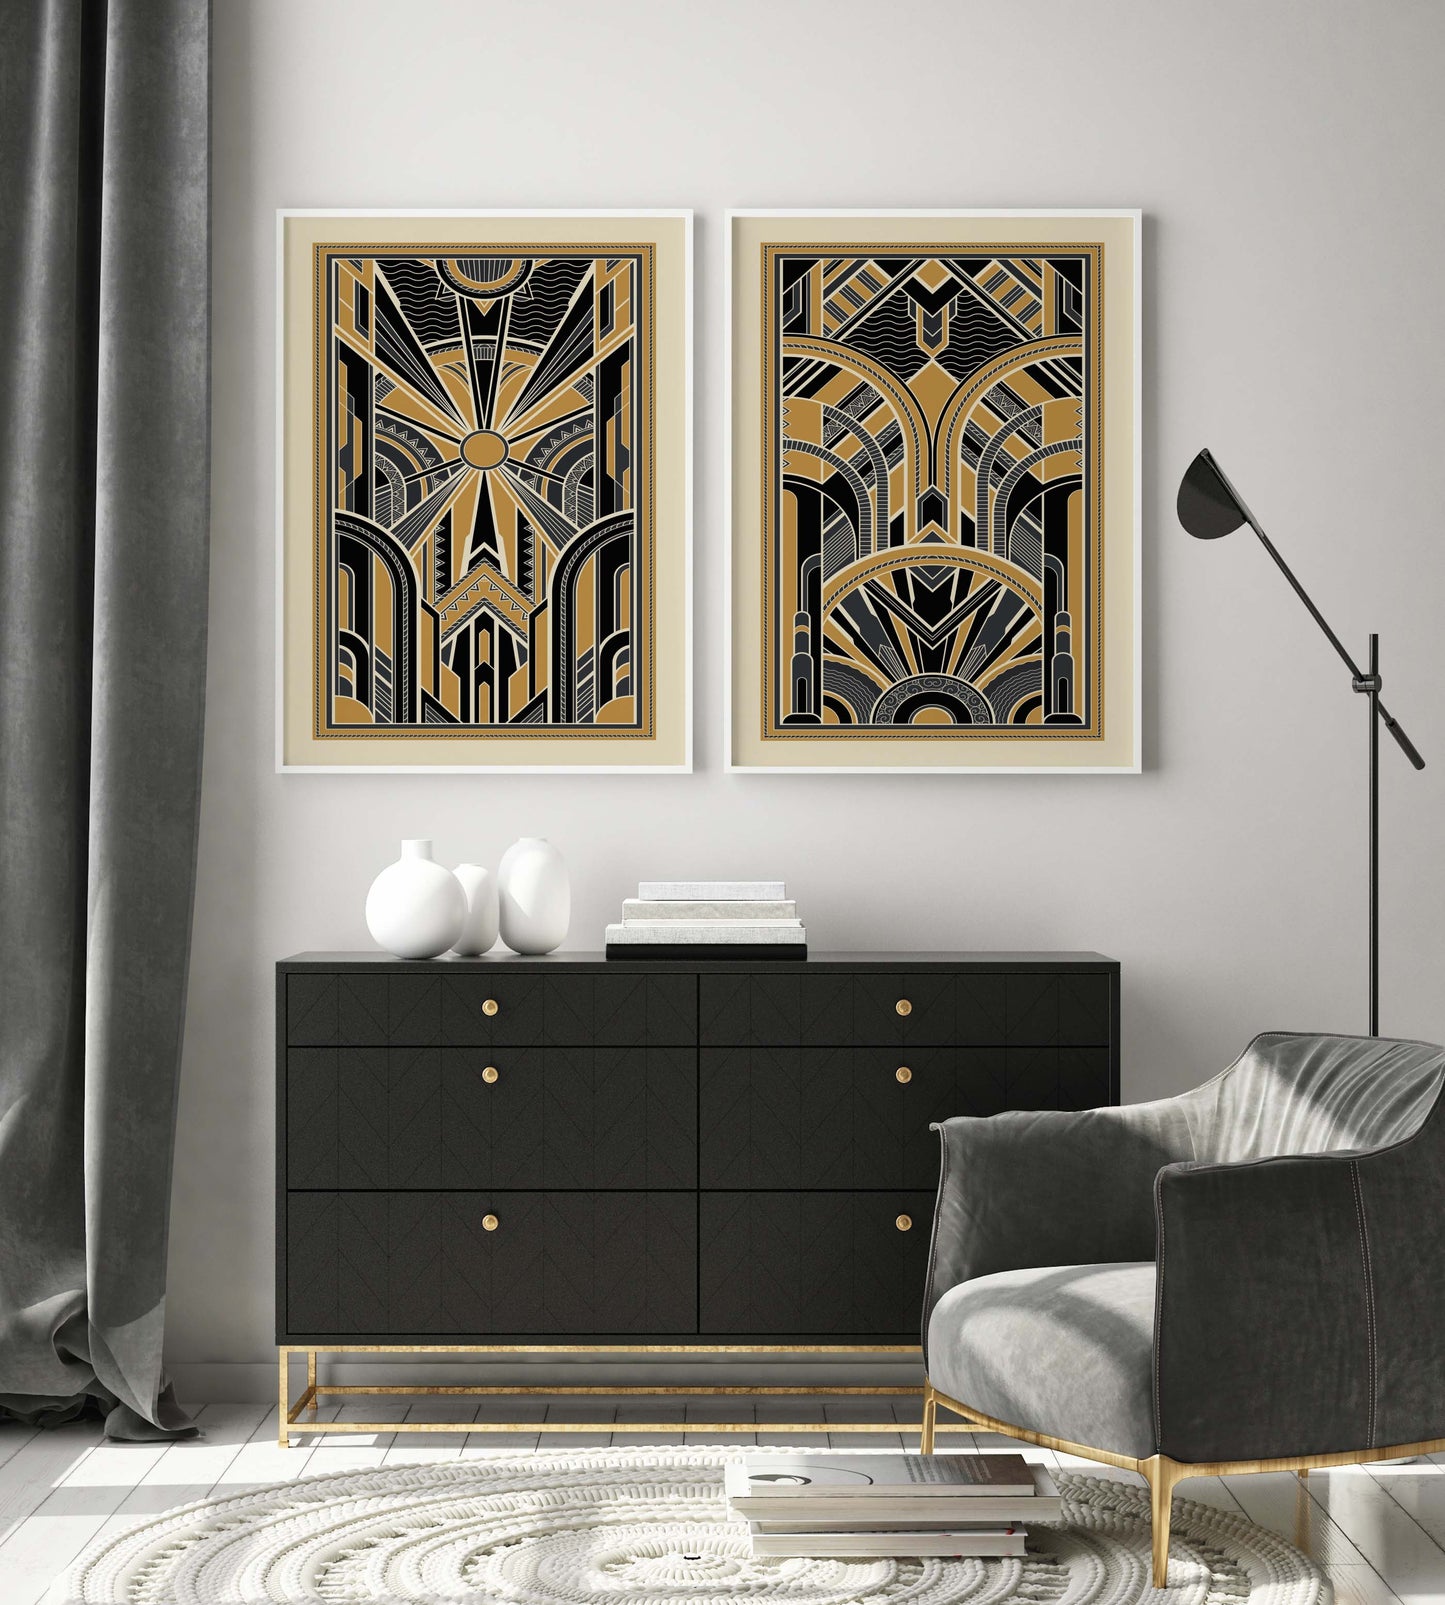 Set of art deco prints with geometric patterns in gold and black